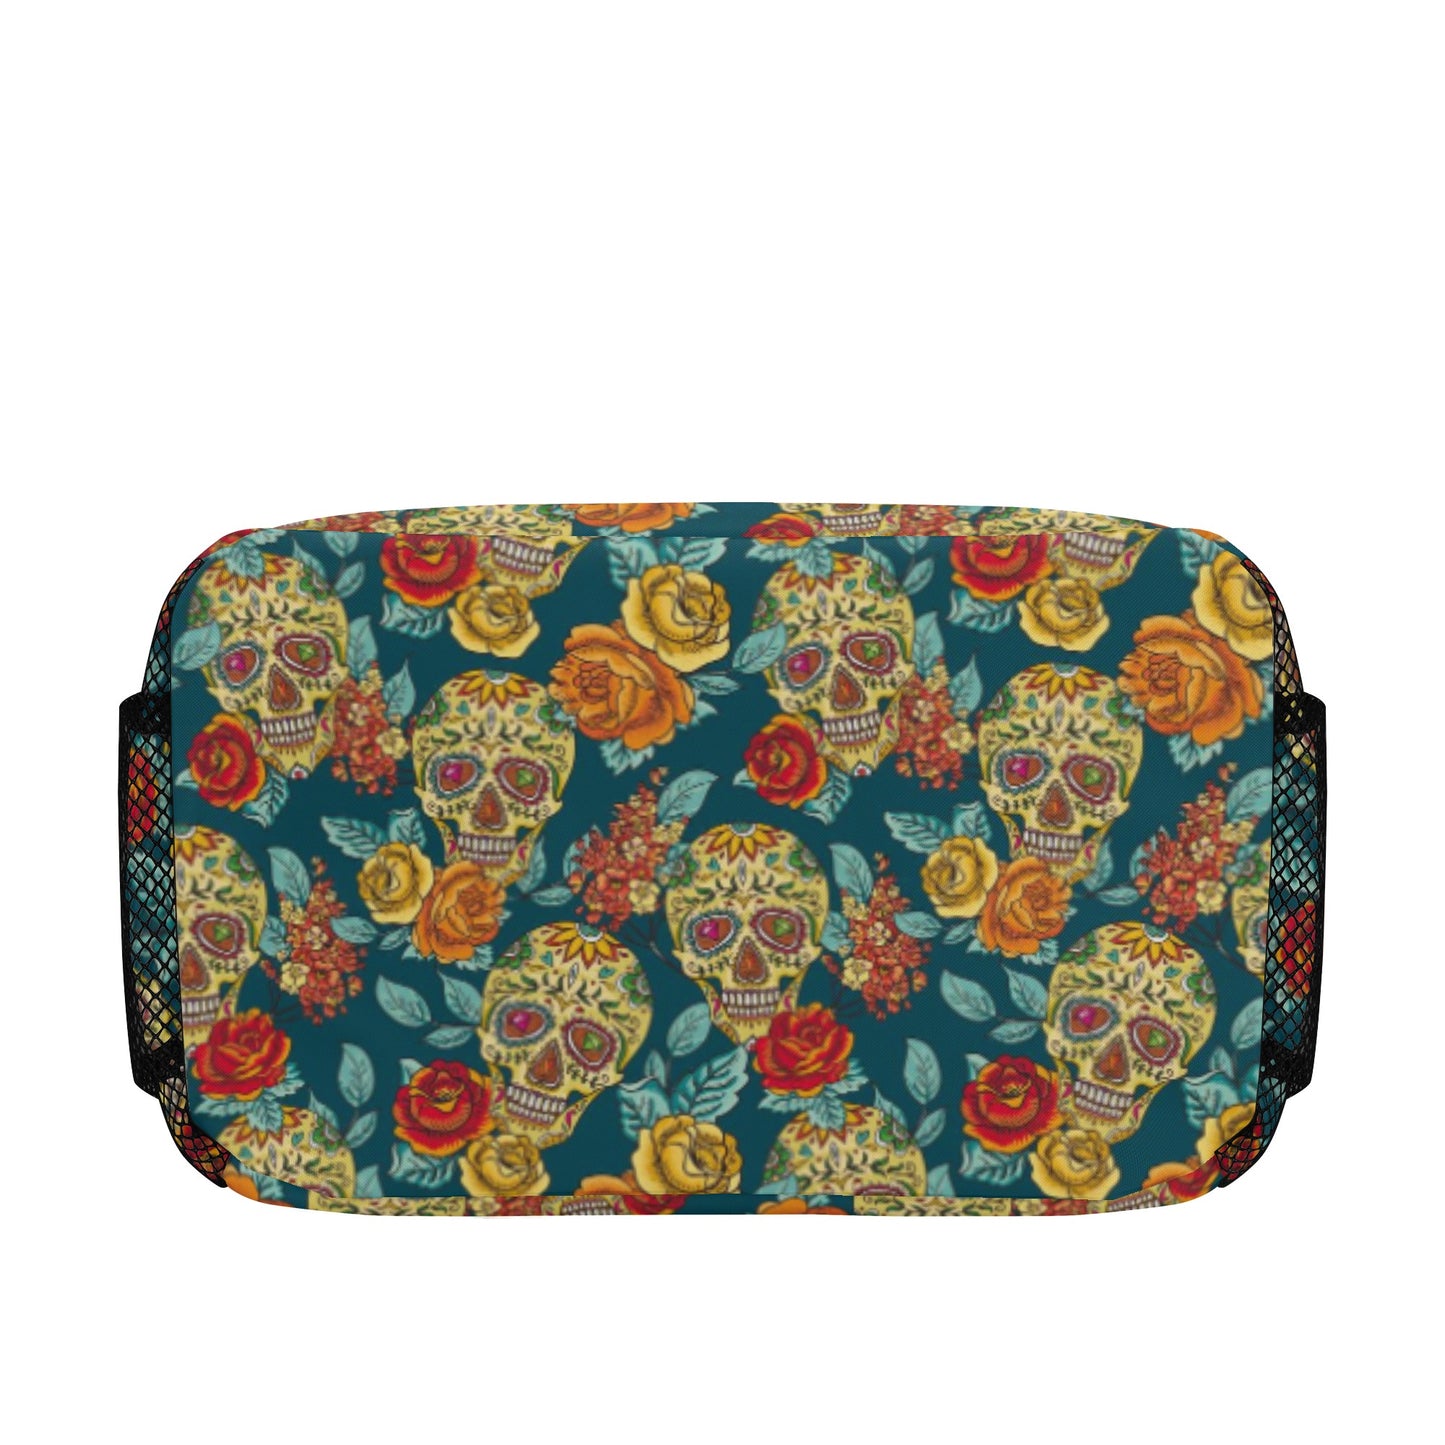 All Floral sugar skull Over Printing Lunch Bag